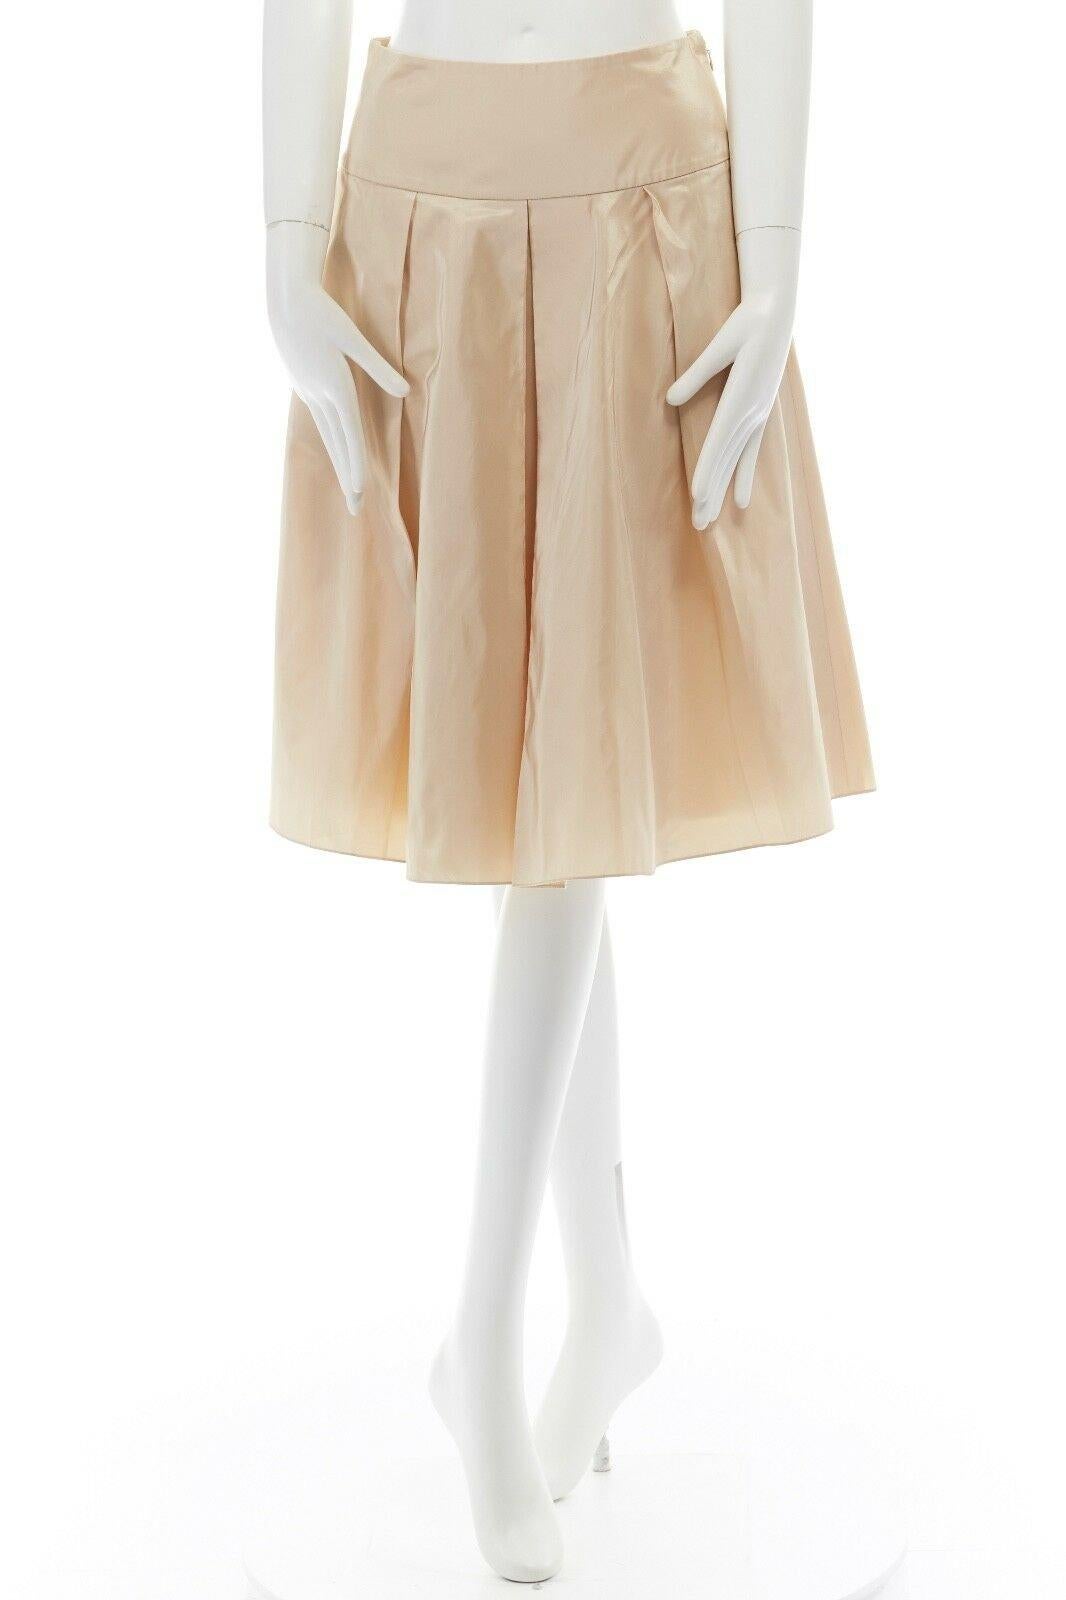 RALPH LAUREN light gold polyester silk blend pleated flared cocktail skirt US2 S 
Reference: LNKO/A00709 
Brand: Ralph Lauren 
Material: Polyester 
Color: Gold 
Pattern: Solid 
Closure: Zip 
Extra Detail: Polyester, silk. Light champagne gold. Flat